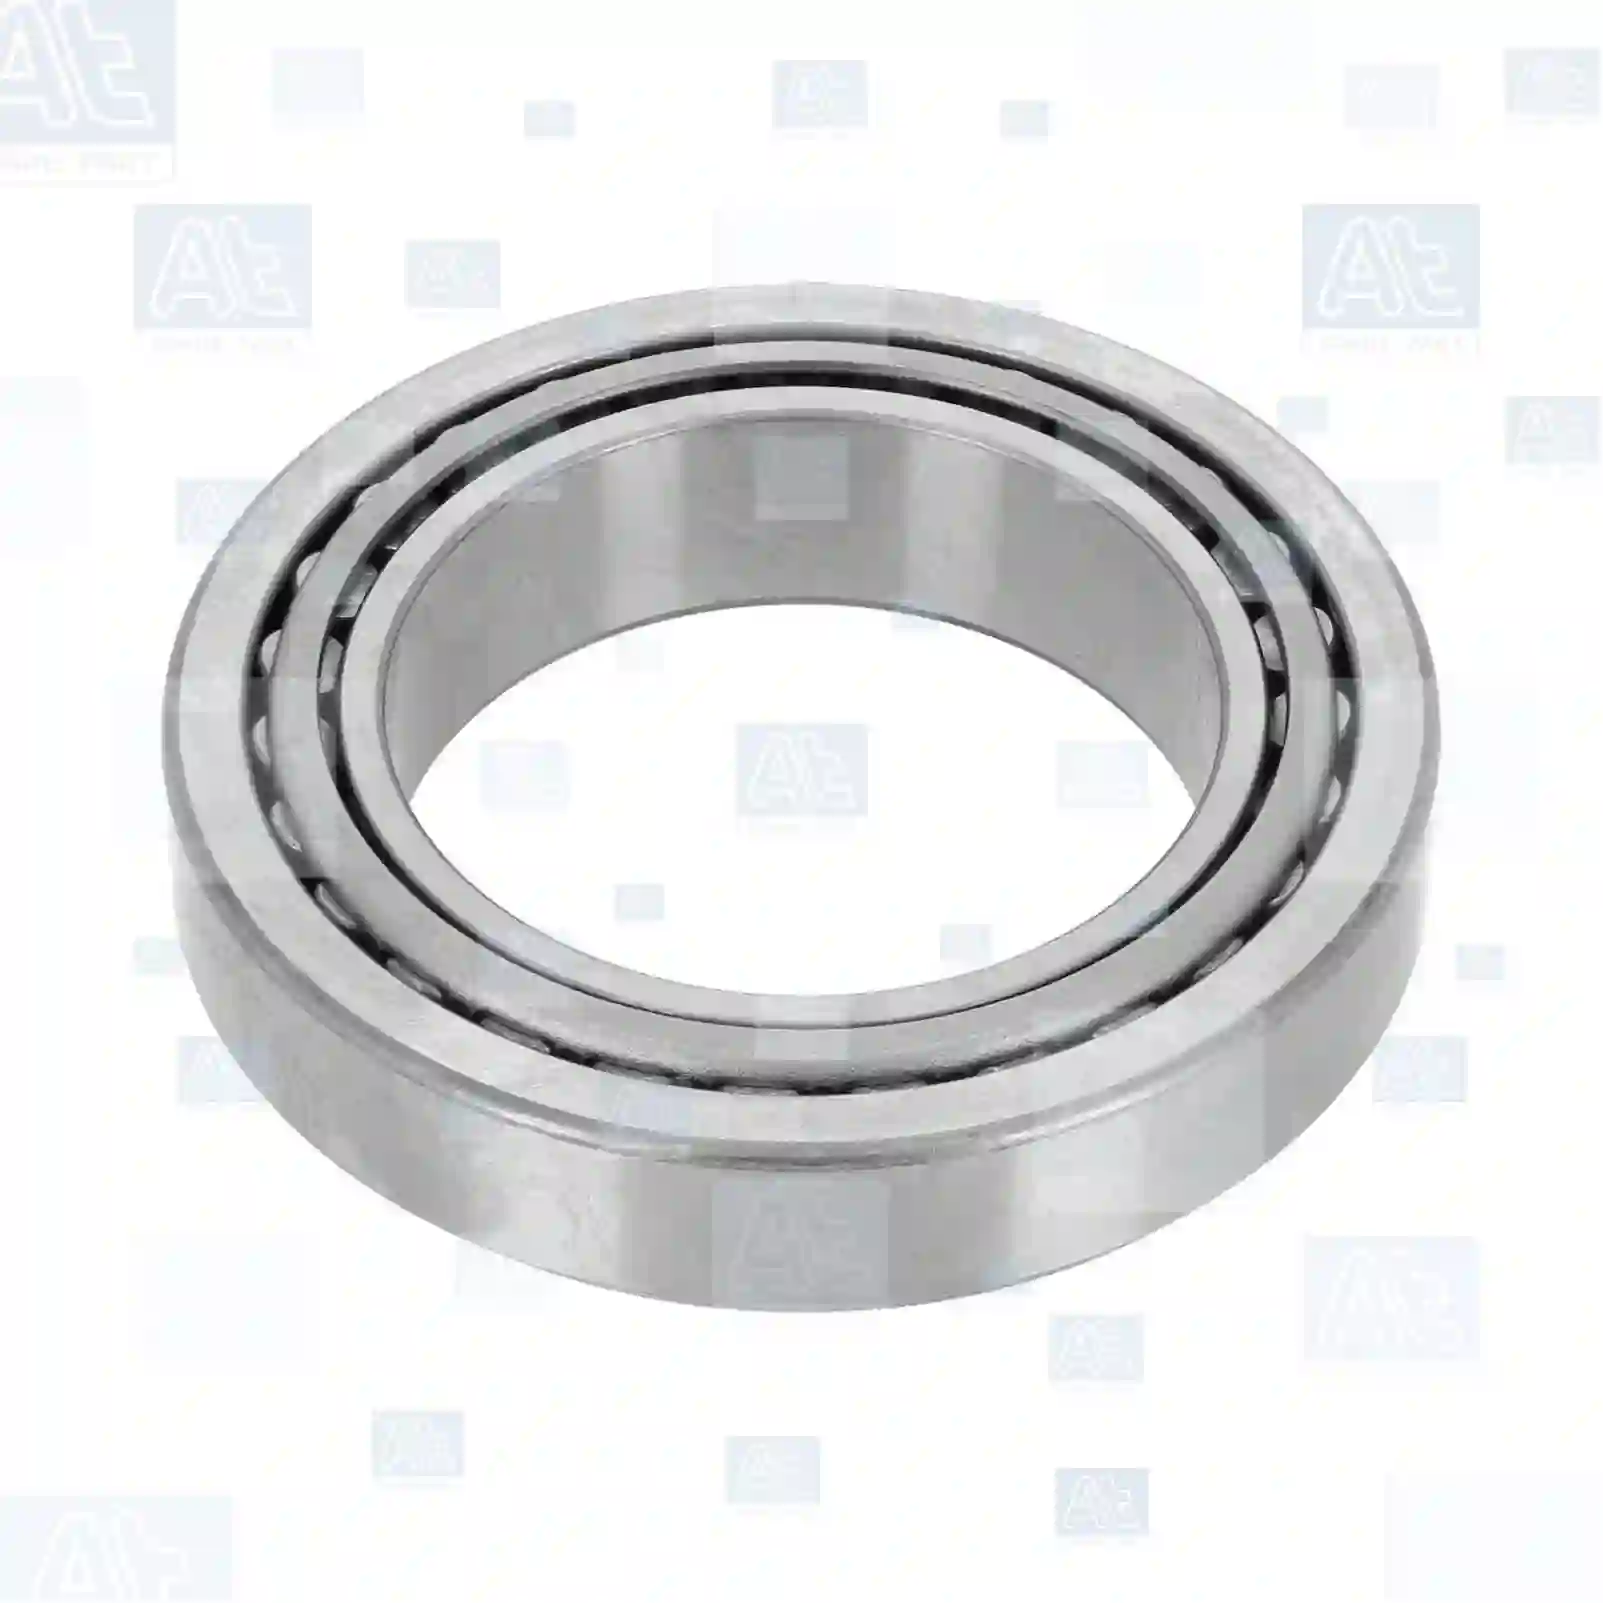 Tapered roller bearing, 77730390, 0059811505, 005092803, 60115335, 01125572, 5010443903, 60115335, 06324800060, 06324801200, 06324811200, 06324890060, 06324890091, 81934200150, 87523001201, 000720032017, 0059811405, 0059811505, 0059811605, 0159810005, 0159810805, 0179818205, 0023336246, 5010443903, 7400184623, 1524964, 184623, 2V5501283, ZG02982-0008 ||  77730390 At Spare Part | Engine, Accelerator Pedal, Camshaft, Connecting Rod, Crankcase, Crankshaft, Cylinder Head, Engine Suspension Mountings, Exhaust Manifold, Exhaust Gas Recirculation, Filter Kits, Flywheel Housing, General Overhaul Kits, Engine, Intake Manifold, Oil Cleaner, Oil Cooler, Oil Filter, Oil Pump, Oil Sump, Piston & Liner, Sensor & Switch, Timing Case, Turbocharger, Cooling System, Belt Tensioner, Coolant Filter, Coolant Pipe, Corrosion Prevention Agent, Drive, Expansion Tank, Fan, Intercooler, Monitors & Gauges, Radiator, Thermostat, V-Belt / Timing belt, Water Pump, Fuel System, Electronical Injector Unit, Feed Pump, Fuel Filter, cpl., Fuel Gauge Sender,  Fuel Line, Fuel Pump, Fuel Tank, Injection Line Kit, Injection Pump, Exhaust System, Clutch & Pedal, Gearbox, Propeller Shaft, Axles, Brake System, Hubs & Wheels, Suspension, Leaf Spring, Universal Parts / Accessories, Steering, Electrical System, Cabin Tapered roller bearing, 77730390, 0059811505, 005092803, 60115335, 01125572, 5010443903, 60115335, 06324800060, 06324801200, 06324811200, 06324890060, 06324890091, 81934200150, 87523001201, 000720032017, 0059811405, 0059811505, 0059811605, 0159810005, 0159810805, 0179818205, 0023336246, 5010443903, 7400184623, 1524964, 184623, 2V5501283, ZG02982-0008 ||  77730390 At Spare Part | Engine, Accelerator Pedal, Camshaft, Connecting Rod, Crankcase, Crankshaft, Cylinder Head, Engine Suspension Mountings, Exhaust Manifold, Exhaust Gas Recirculation, Filter Kits, Flywheel Housing, General Overhaul Kits, Engine, Intake Manifold, Oil Cleaner, Oil Cooler, Oil Filter, Oil Pump, Oil Sump, Piston & Liner, Sensor & Switch, Timing Case, Turbocharger, Cooling System, Belt Tensioner, Coolant Filter, Coolant Pipe, Corrosion Prevention Agent, Drive, Expansion Tank, Fan, Intercooler, Monitors & Gauges, Radiator, Thermostat, V-Belt / Timing belt, Water Pump, Fuel System, Electronical Injector Unit, Feed Pump, Fuel Filter, cpl., Fuel Gauge Sender,  Fuel Line, Fuel Pump, Fuel Tank, Injection Line Kit, Injection Pump, Exhaust System, Clutch & Pedal, Gearbox, Propeller Shaft, Axles, Brake System, Hubs & Wheels, Suspension, Leaf Spring, Universal Parts / Accessories, Steering, Electrical System, Cabin